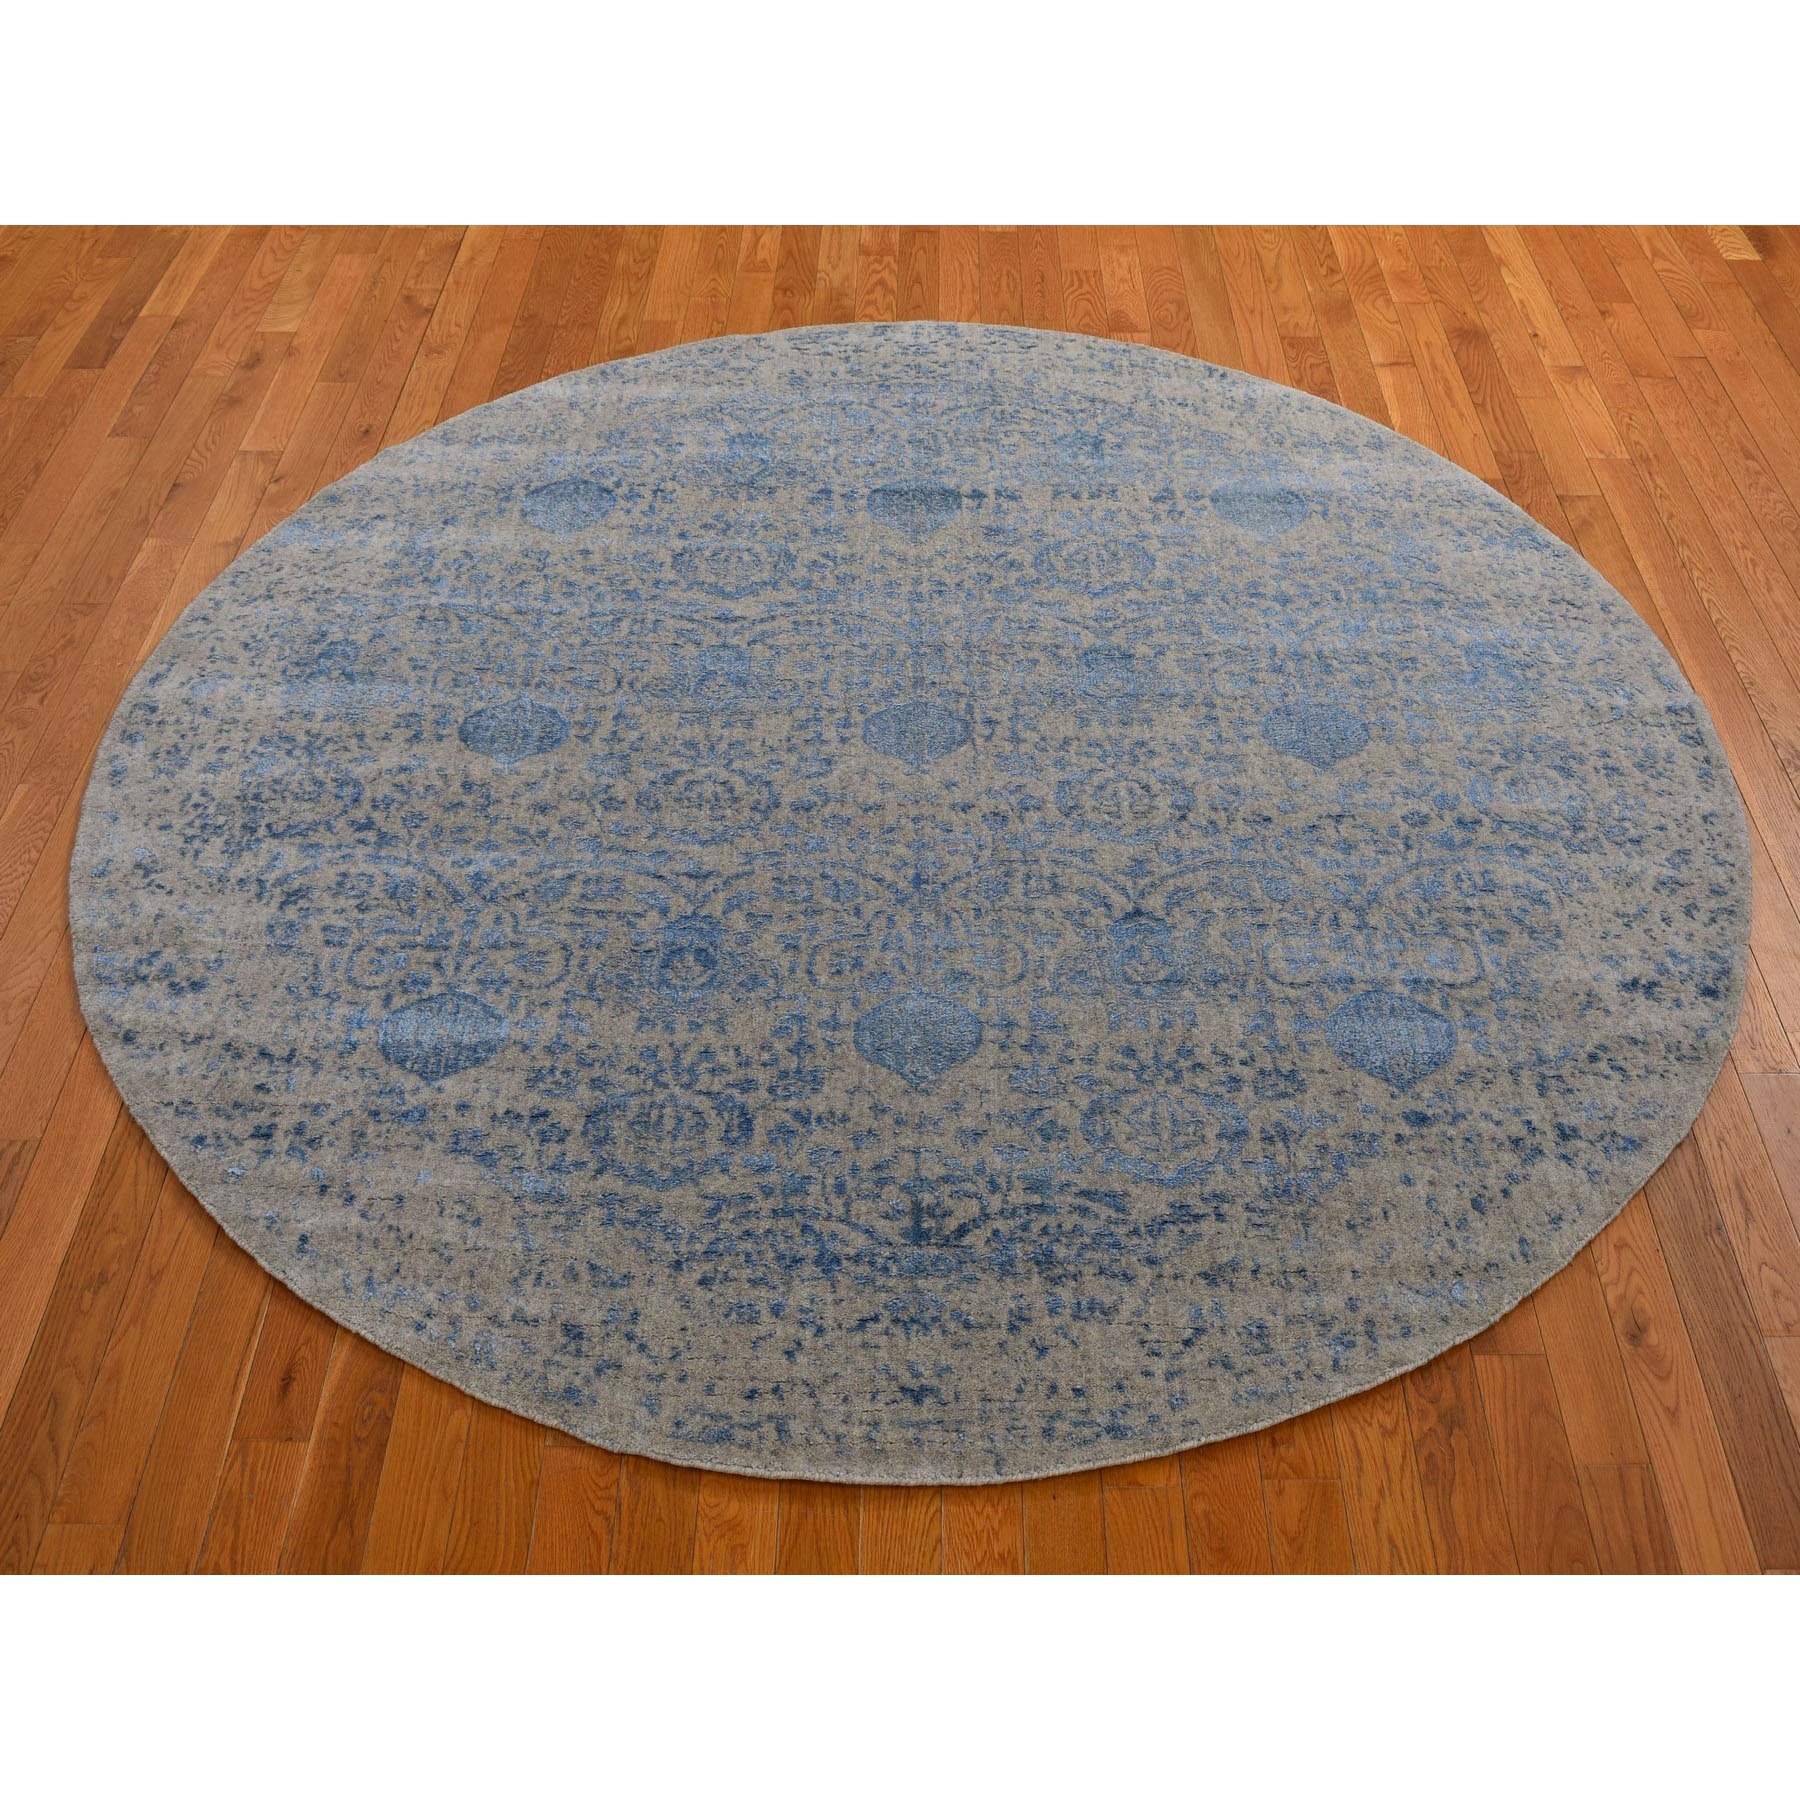 7-10 x7-10  Blue Jacquard Hand Loomed Wool and Art Silk Pomegranate Design Round Oriental Rug 